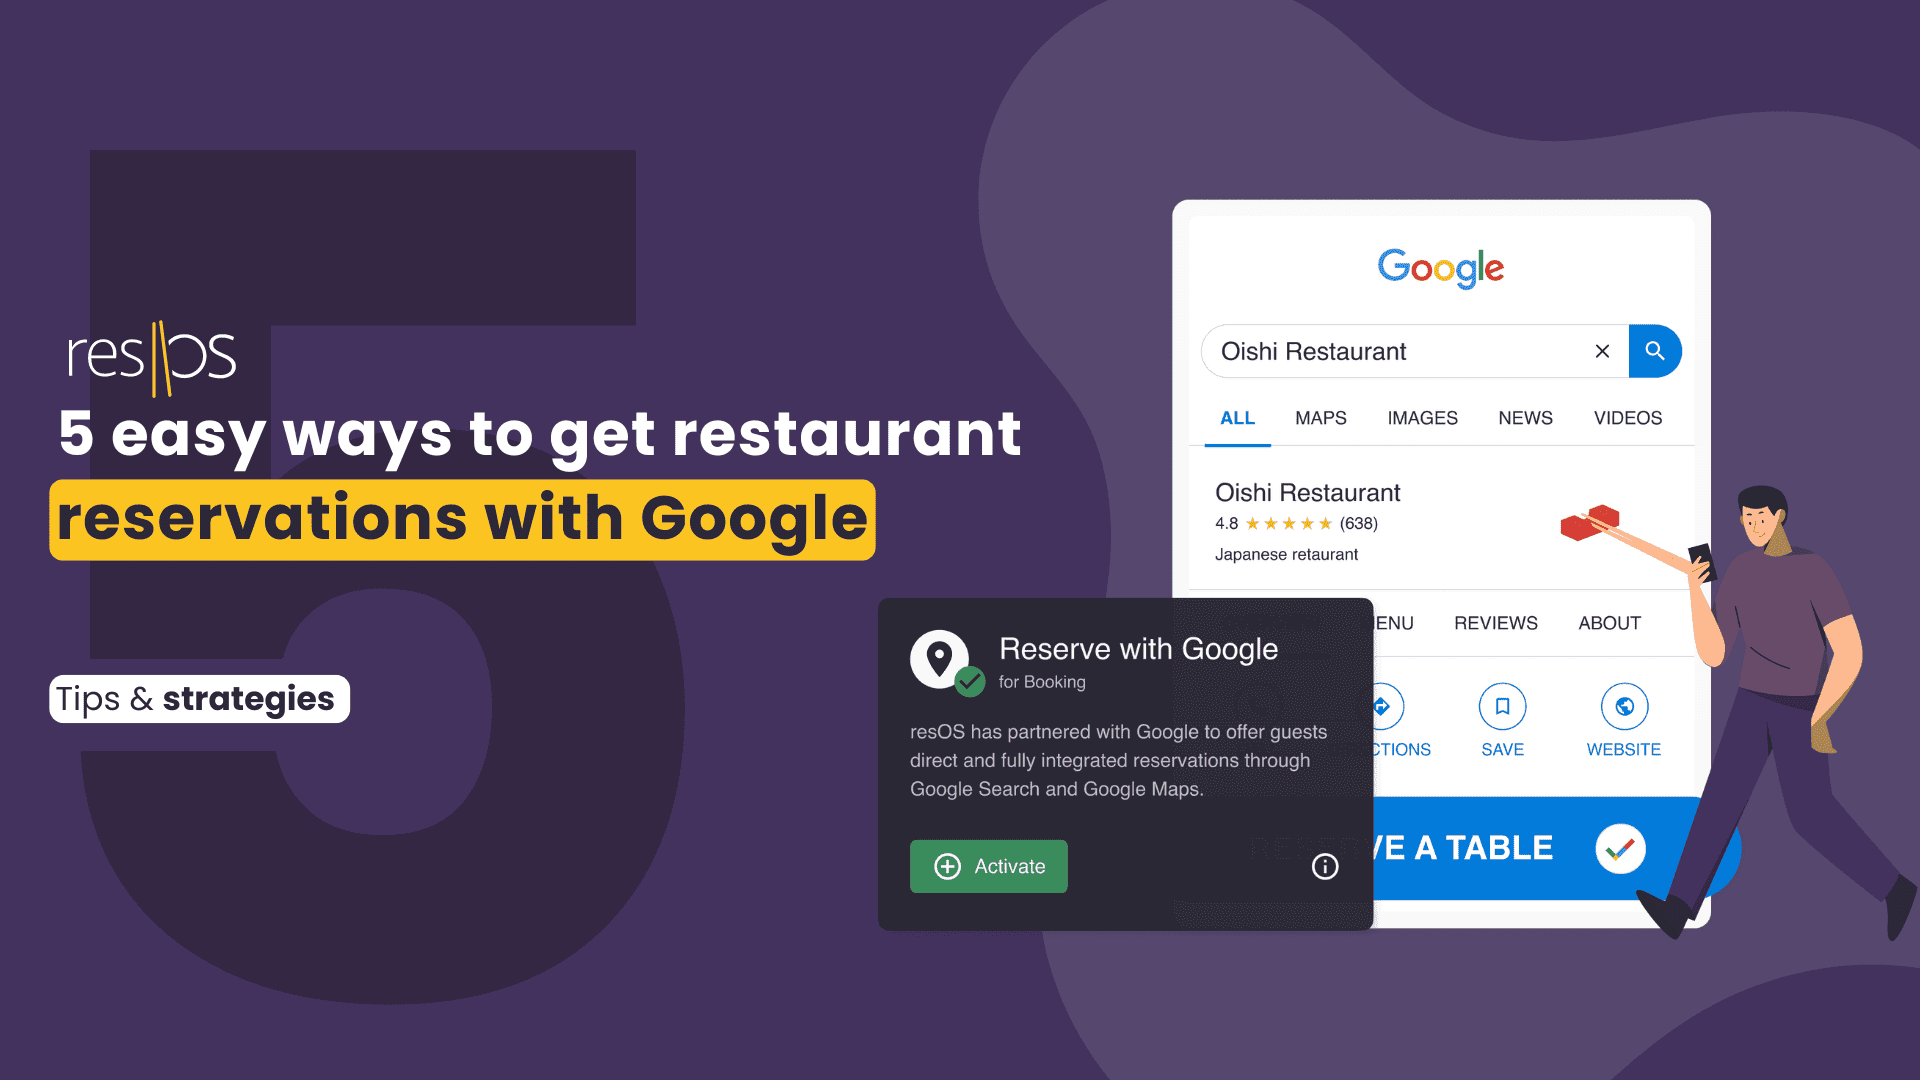 5 easy ways to get restaurant reservations with Google